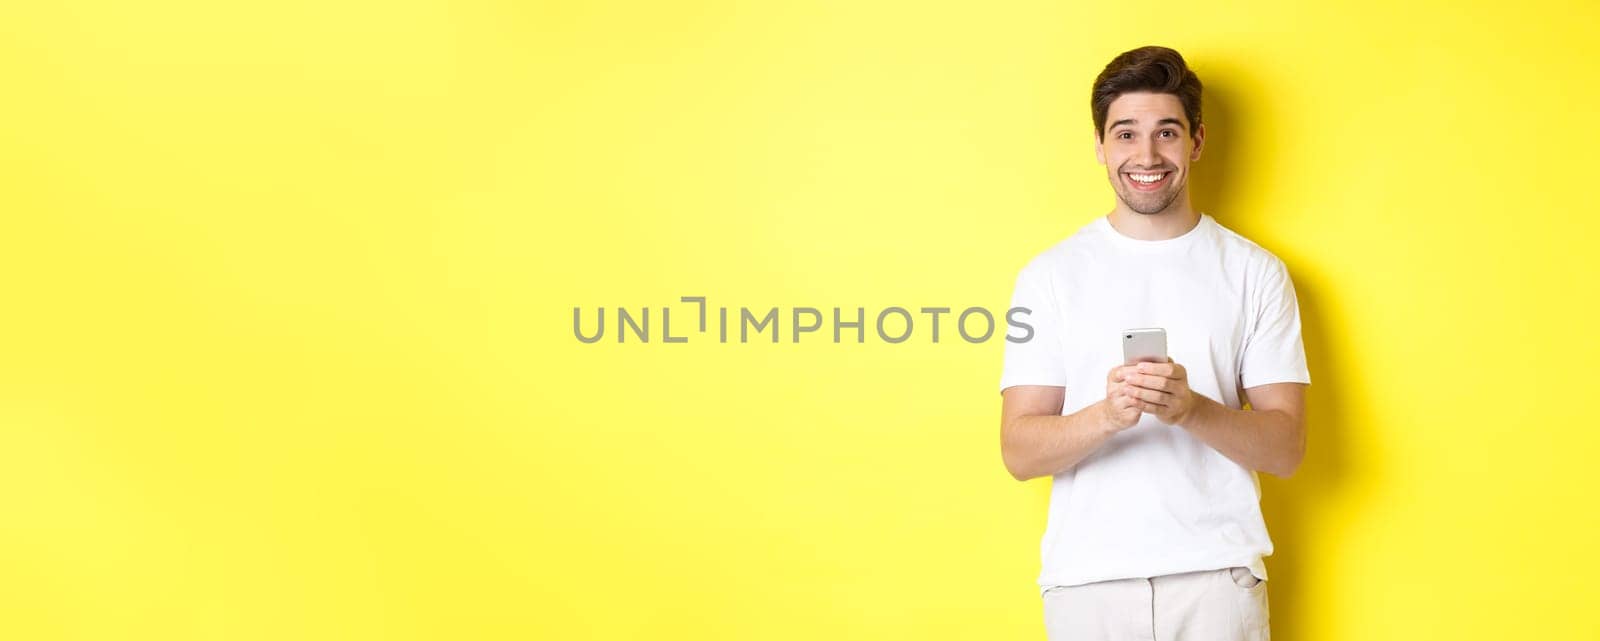 Man smiling and looking happy after reading promo offer on smartphone, standing against yellow background in white t-shirt.